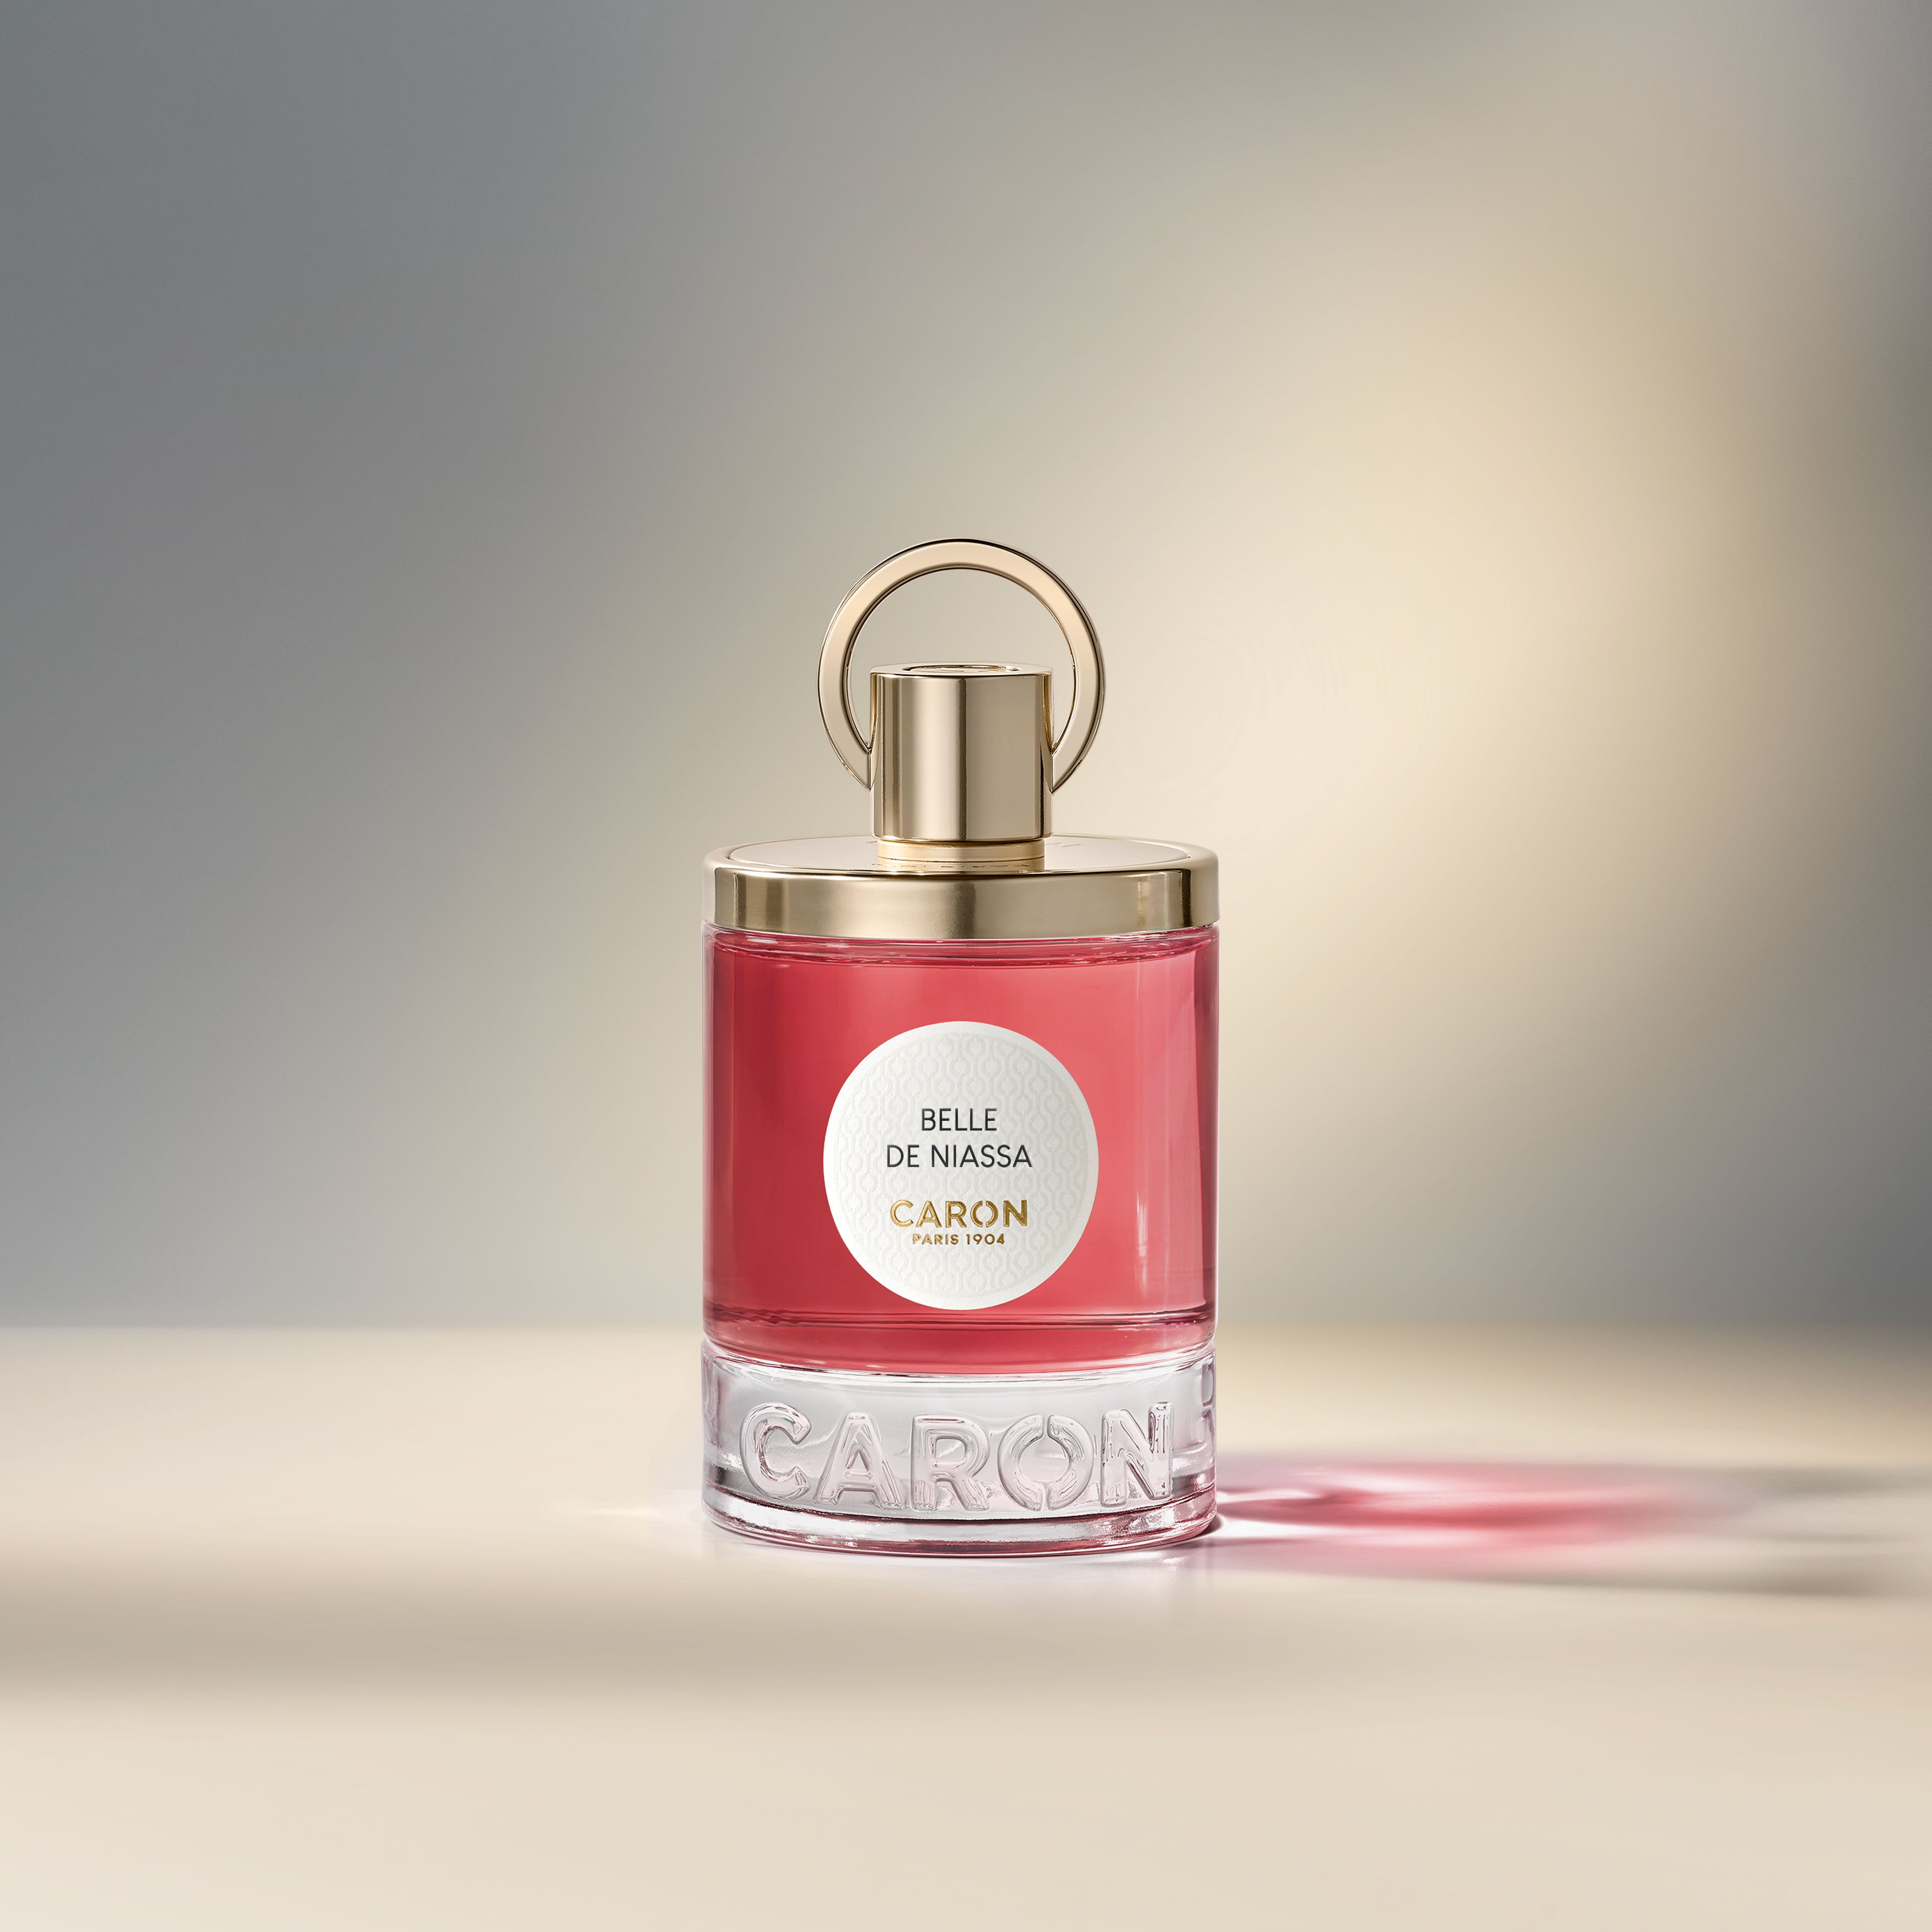 Gulf fragrance market strikes the right note